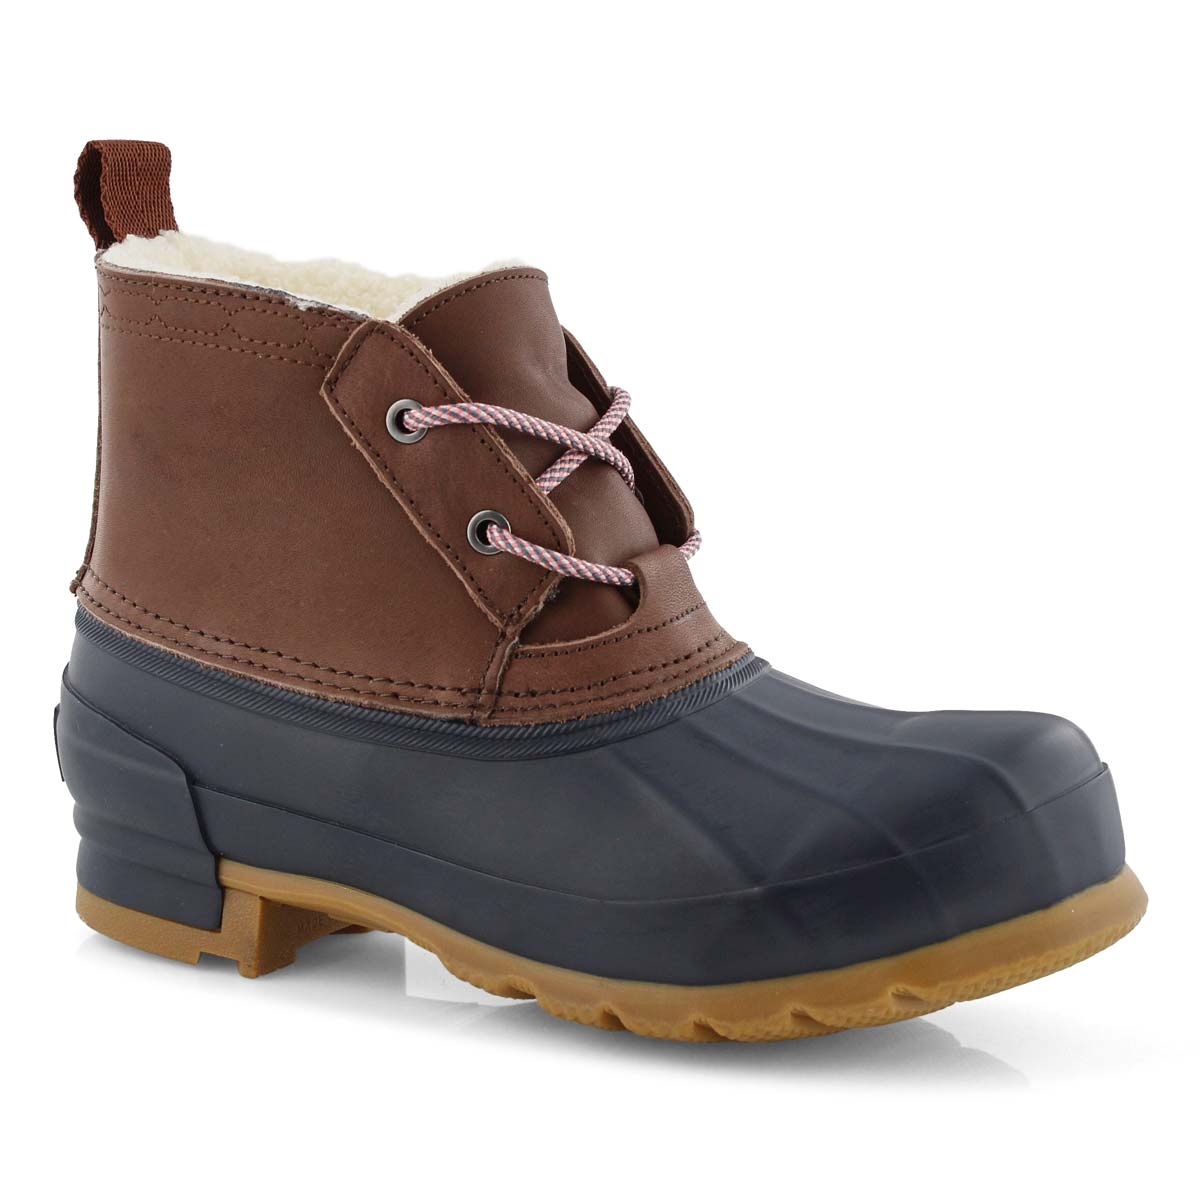 hunter pac boots